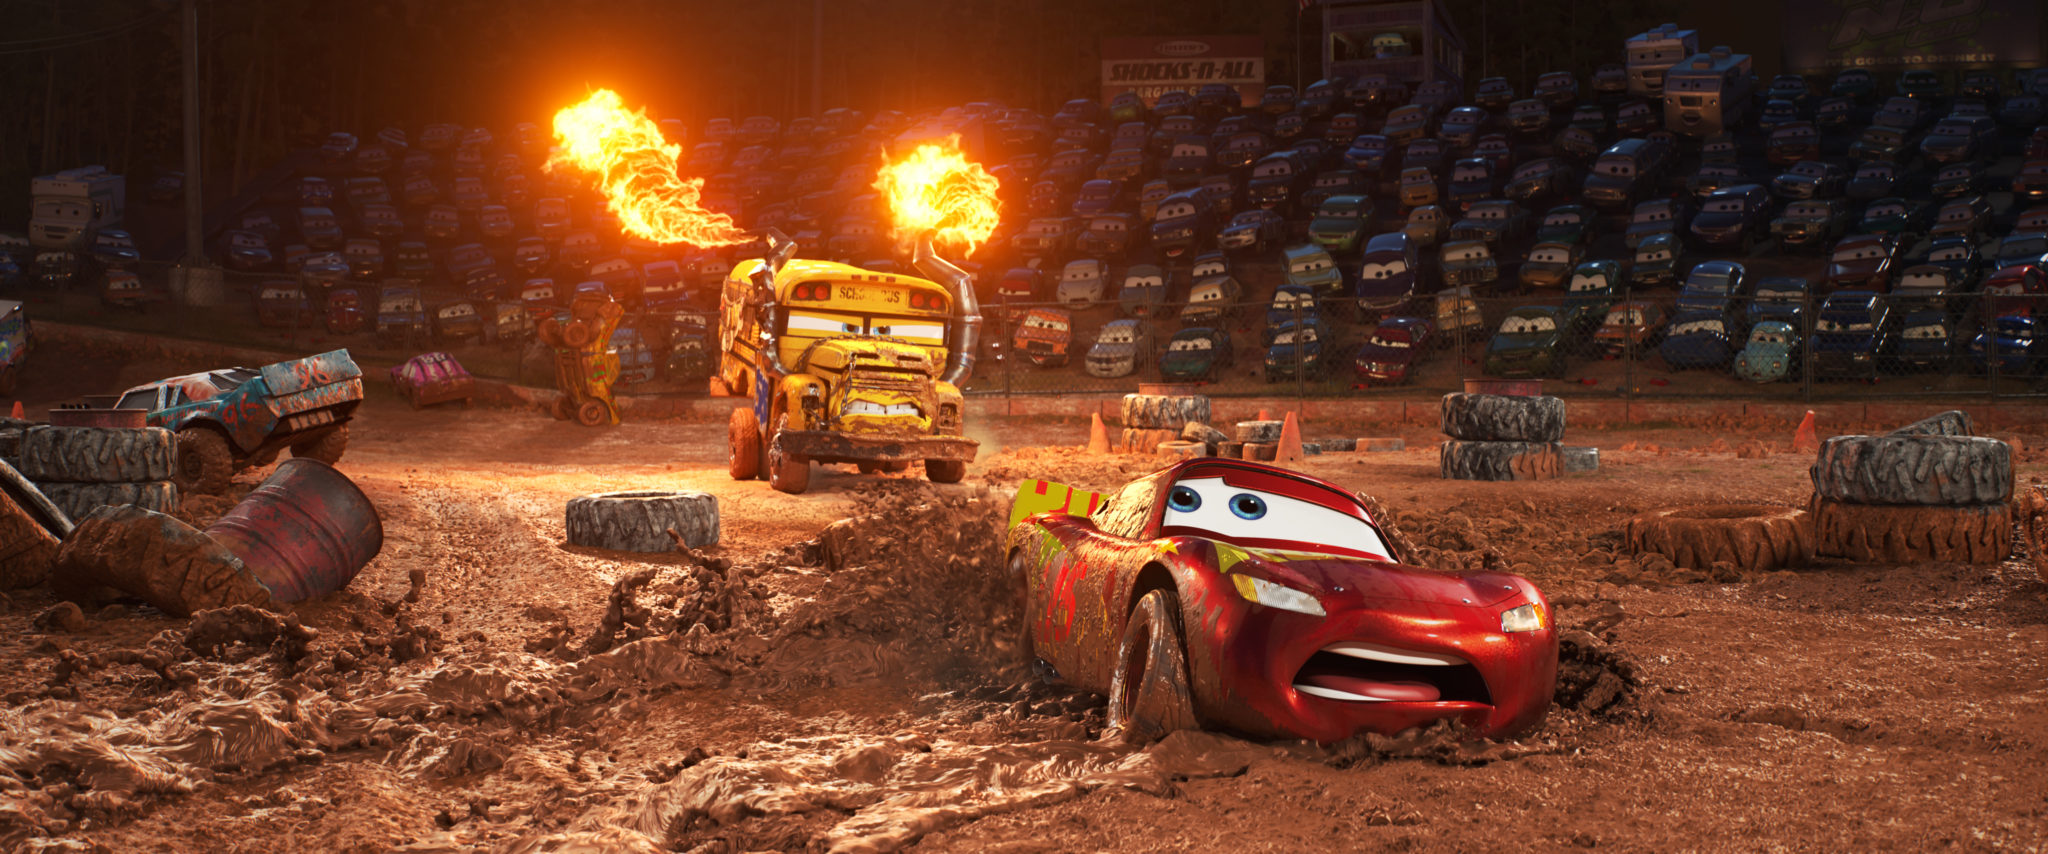 Lineup of new characters in Pixar’s Cars 3